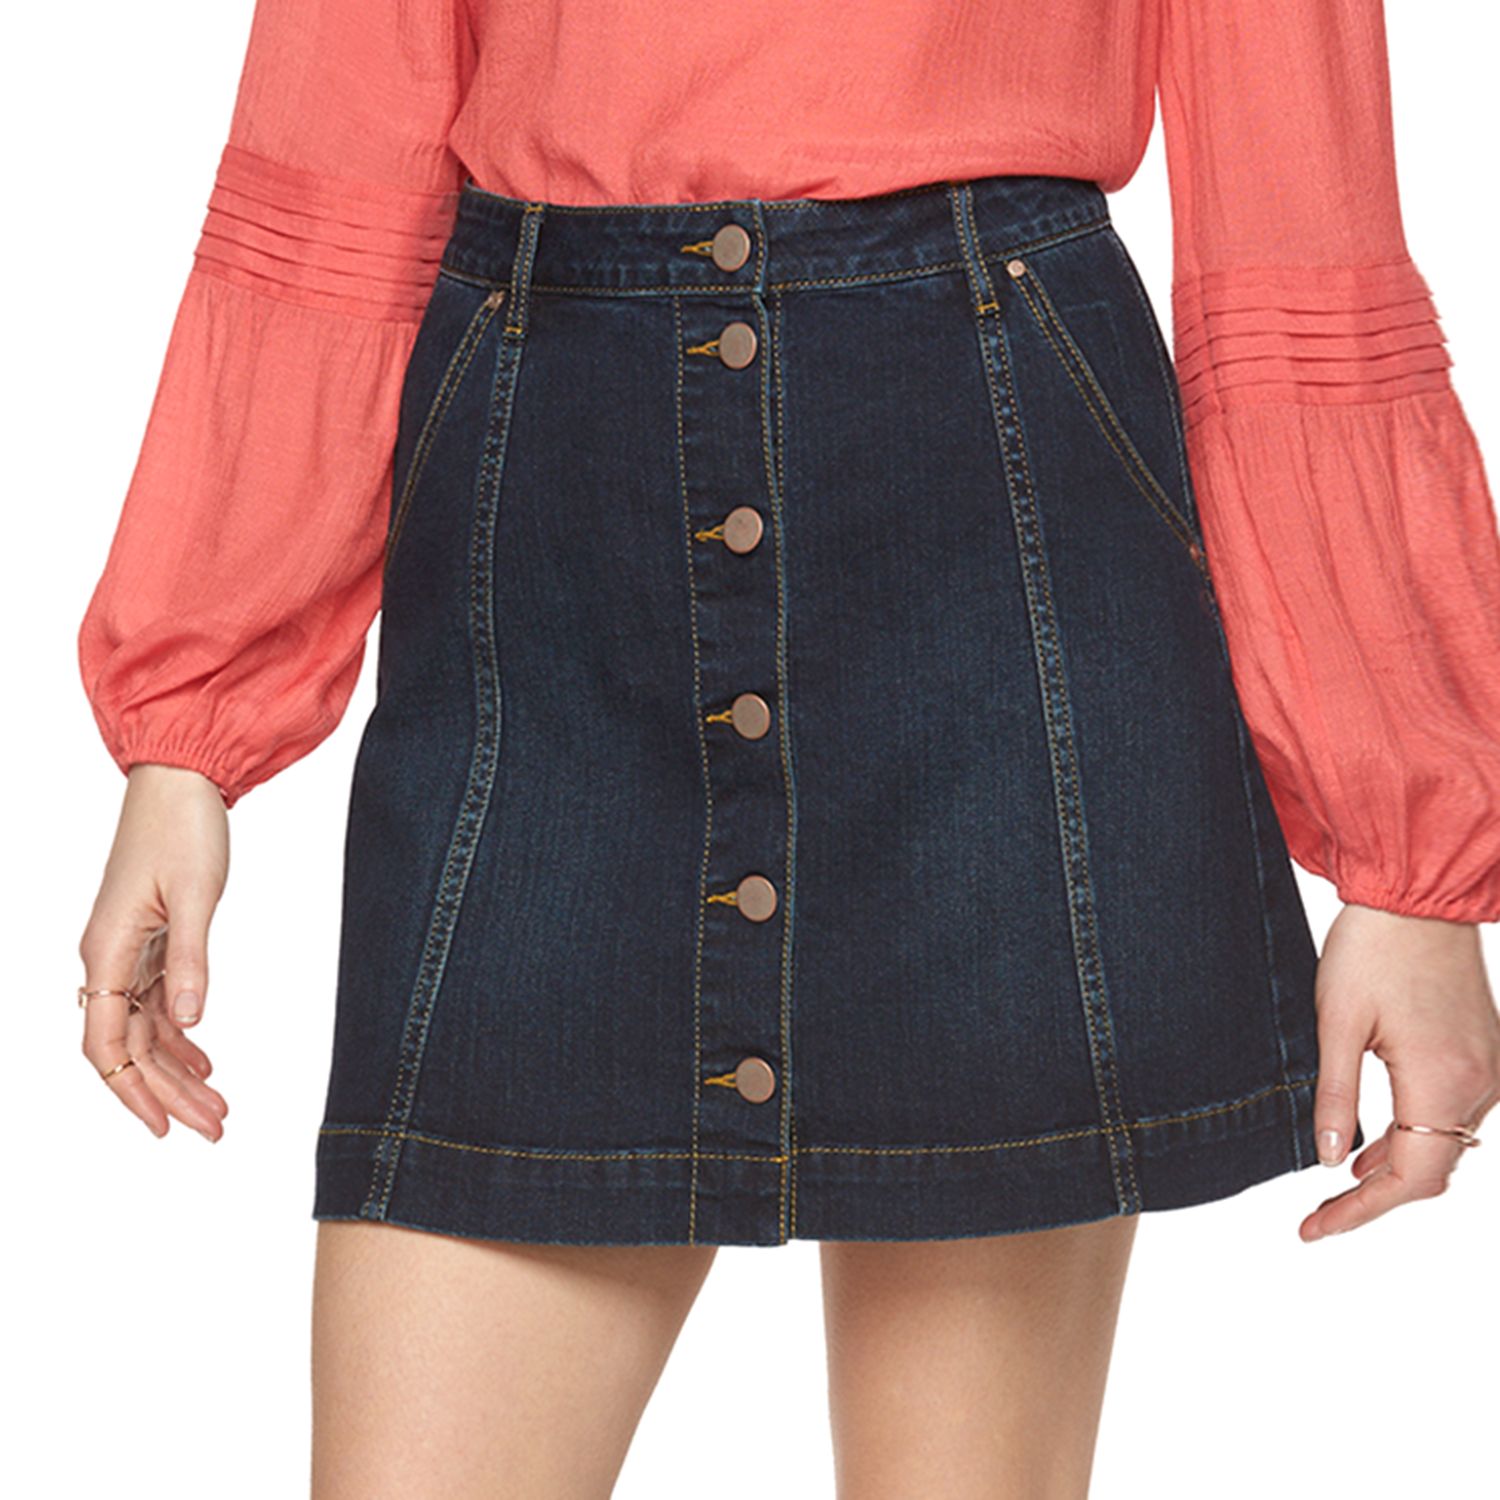 jeans skirt with buttons